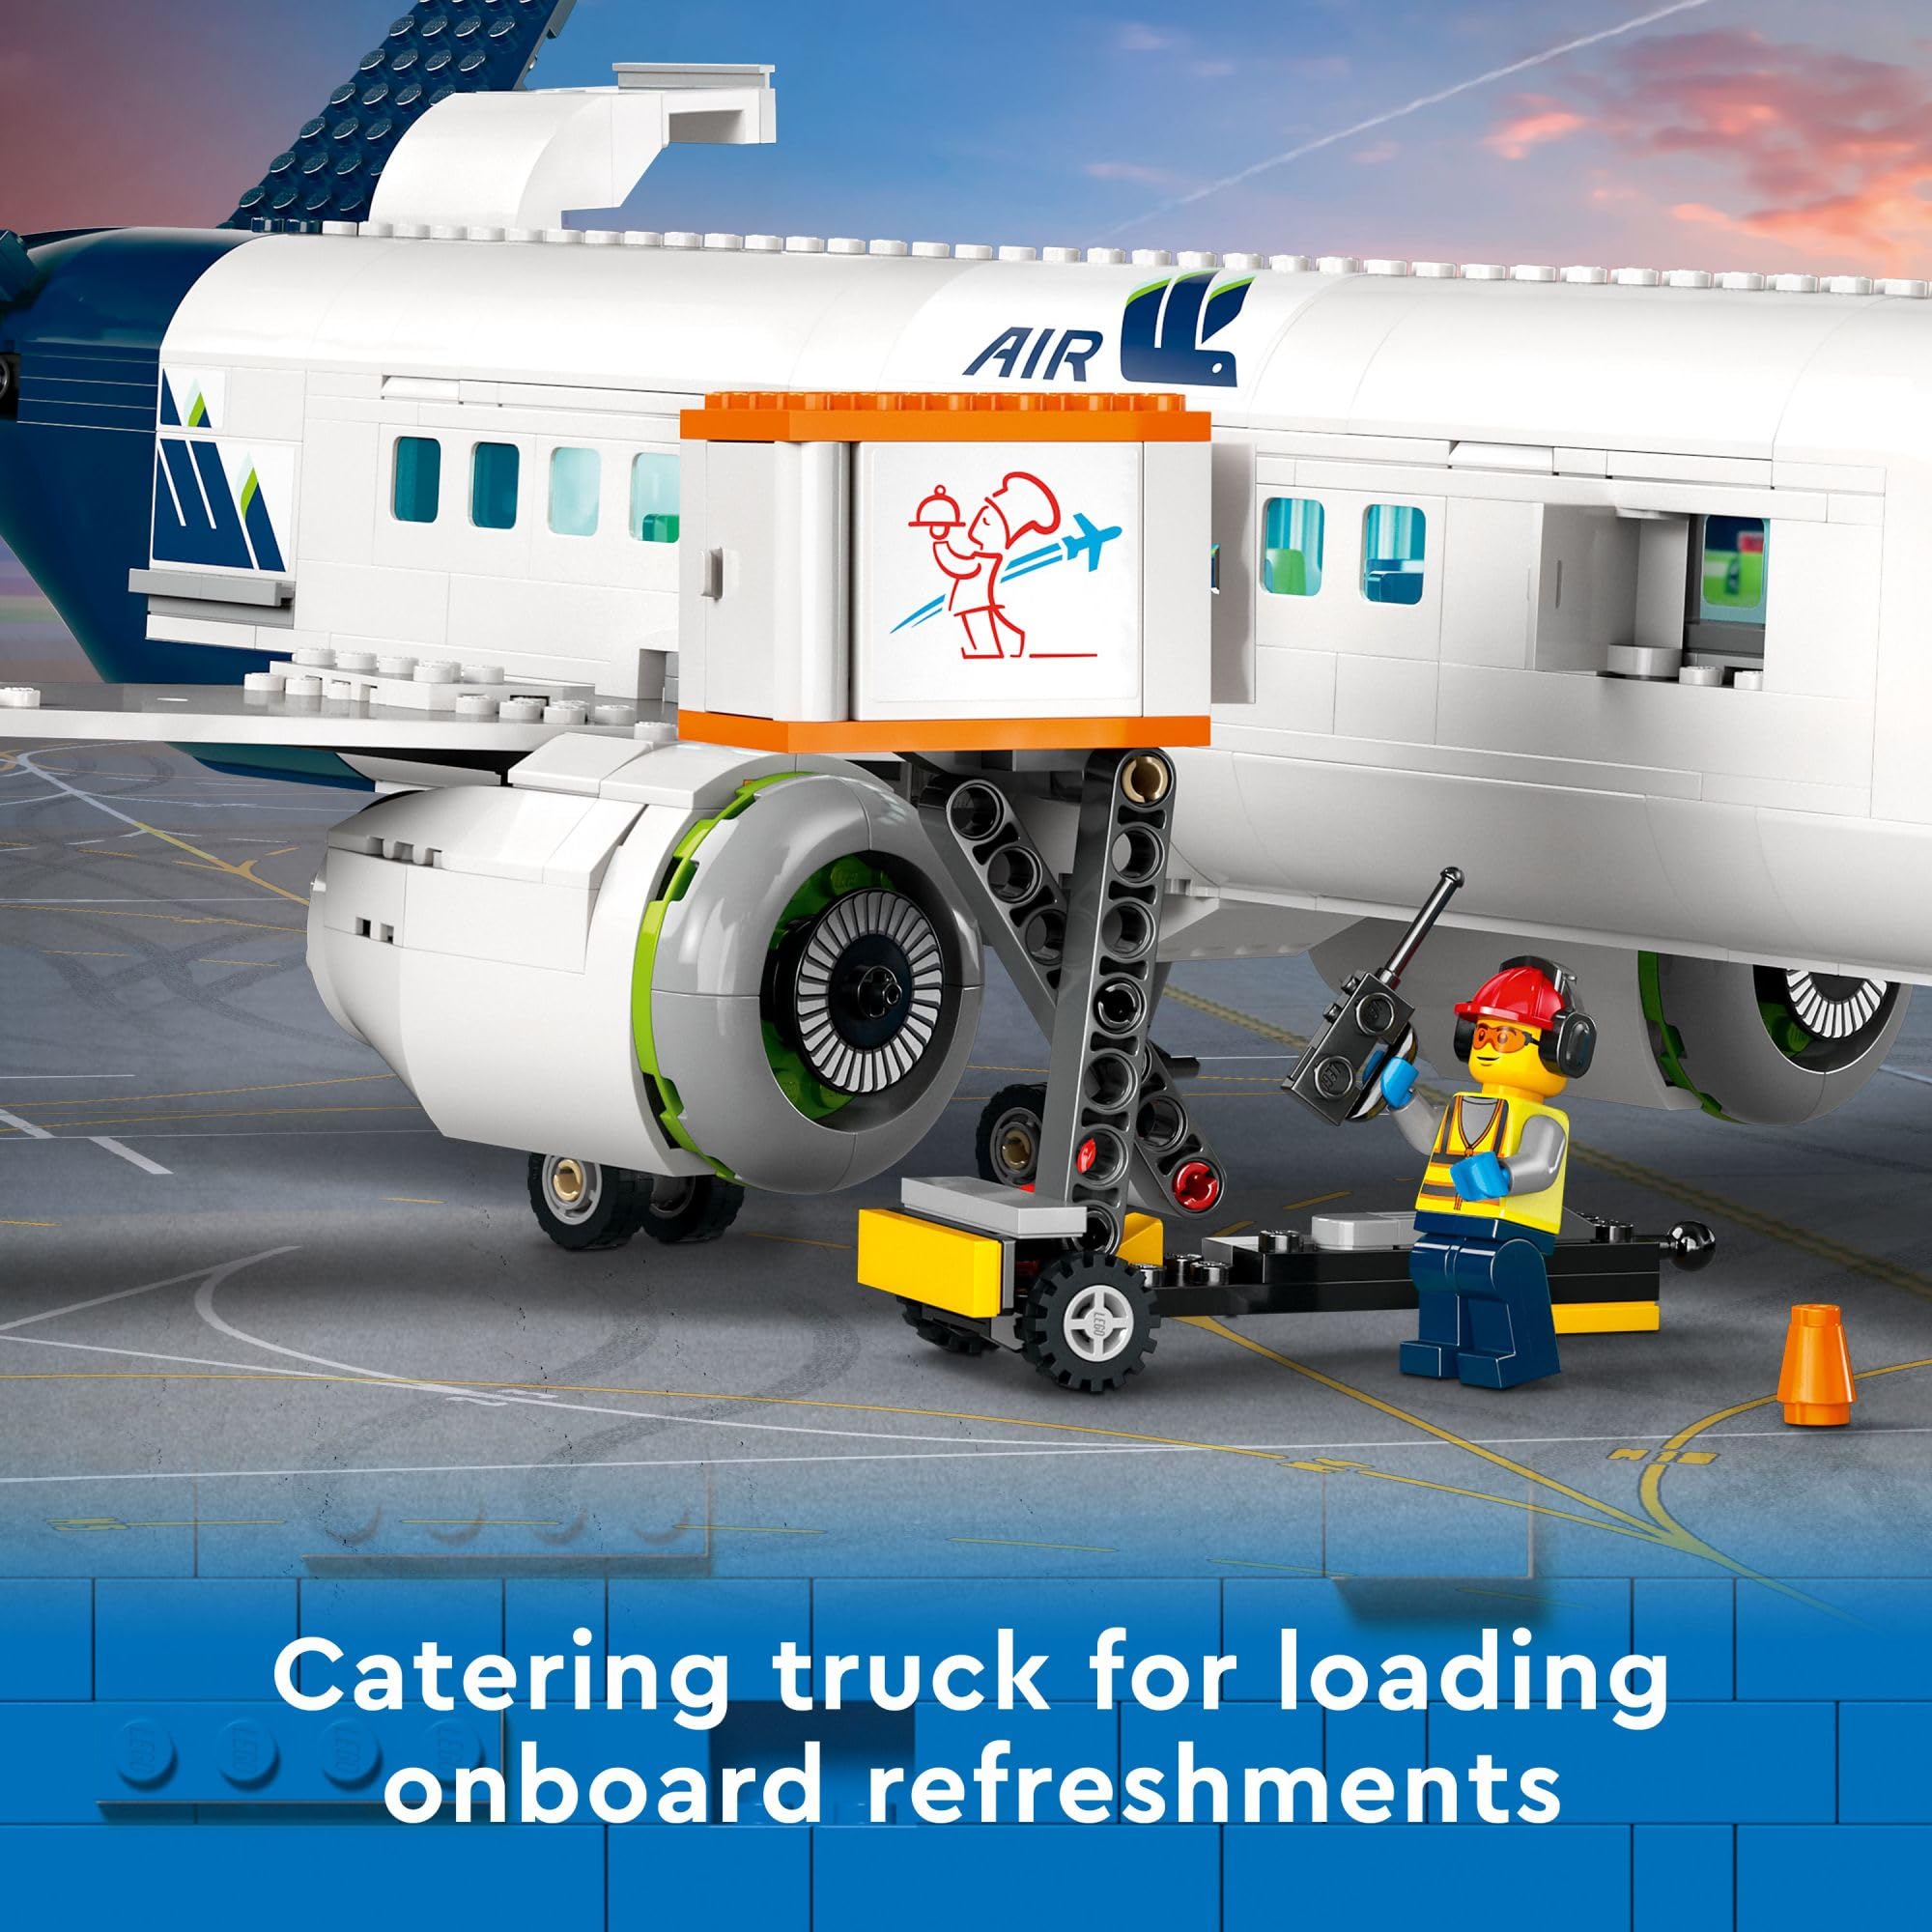 LEGO City Passenger Airplane 60367 Building Toy Set; Fun Airplane STEM Toy for Kids with a Large Airplane, Passenger Bus, Luggage Truck, Container Loader, and 9 Minifigures